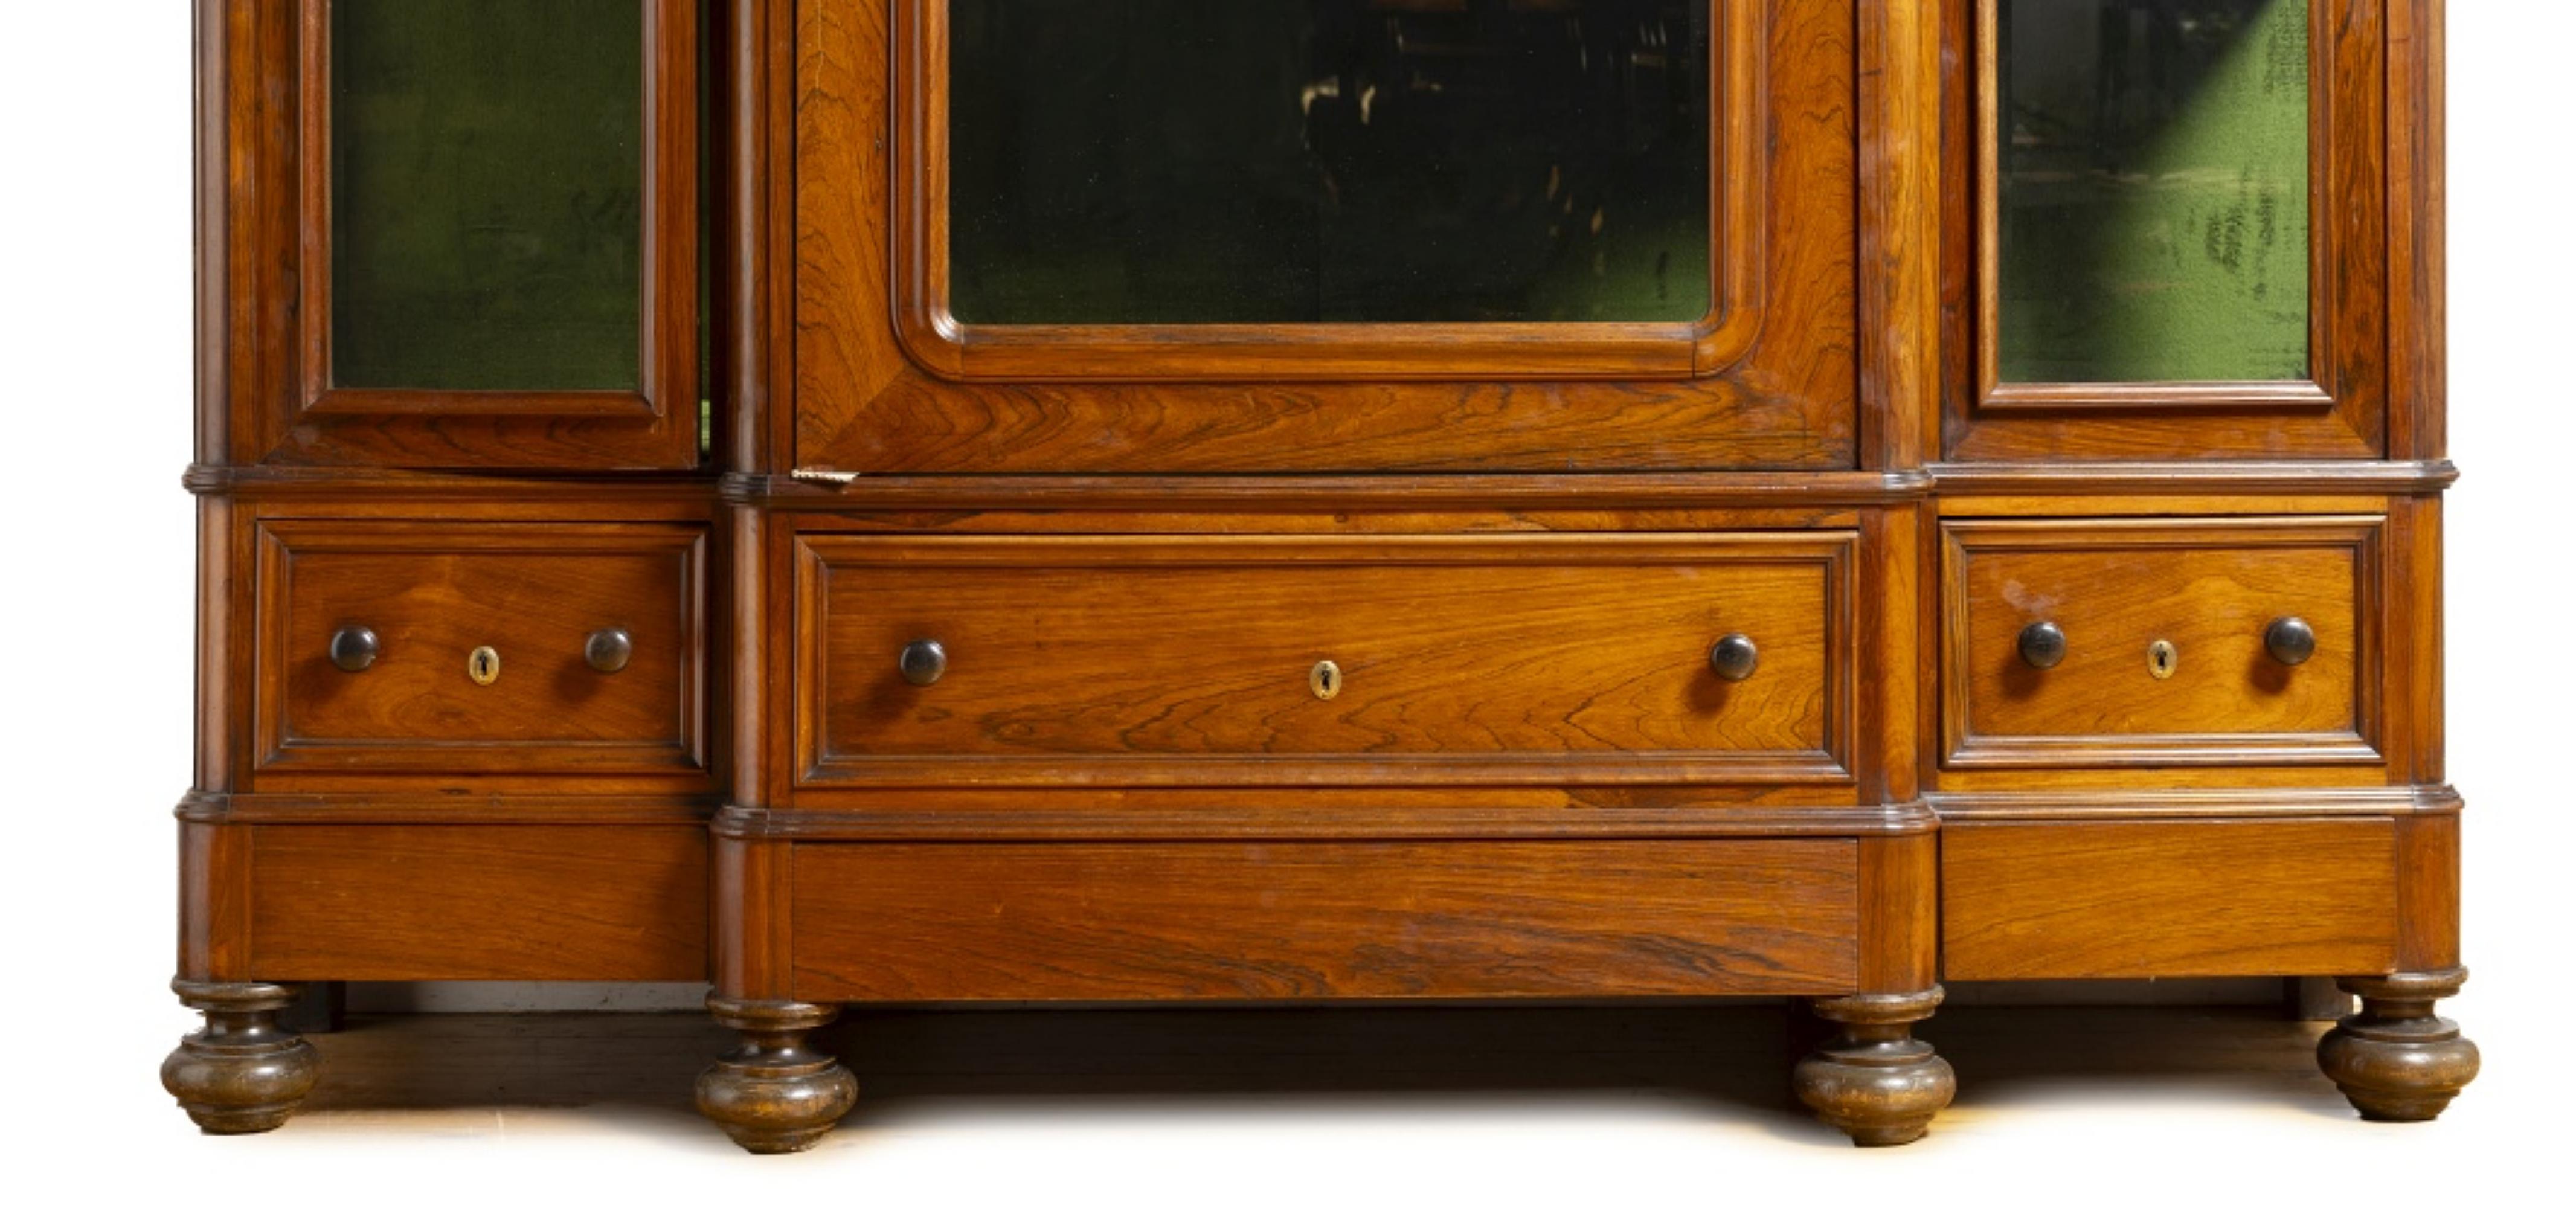 LARGE DISPLAY CABINET 19th Century

rosewood wood
with three doors, glass sides and three drawers. Interior with two shelves covered in velvet in shades of green.
Dim.: 235 x 191 x 60 cm
good conditions